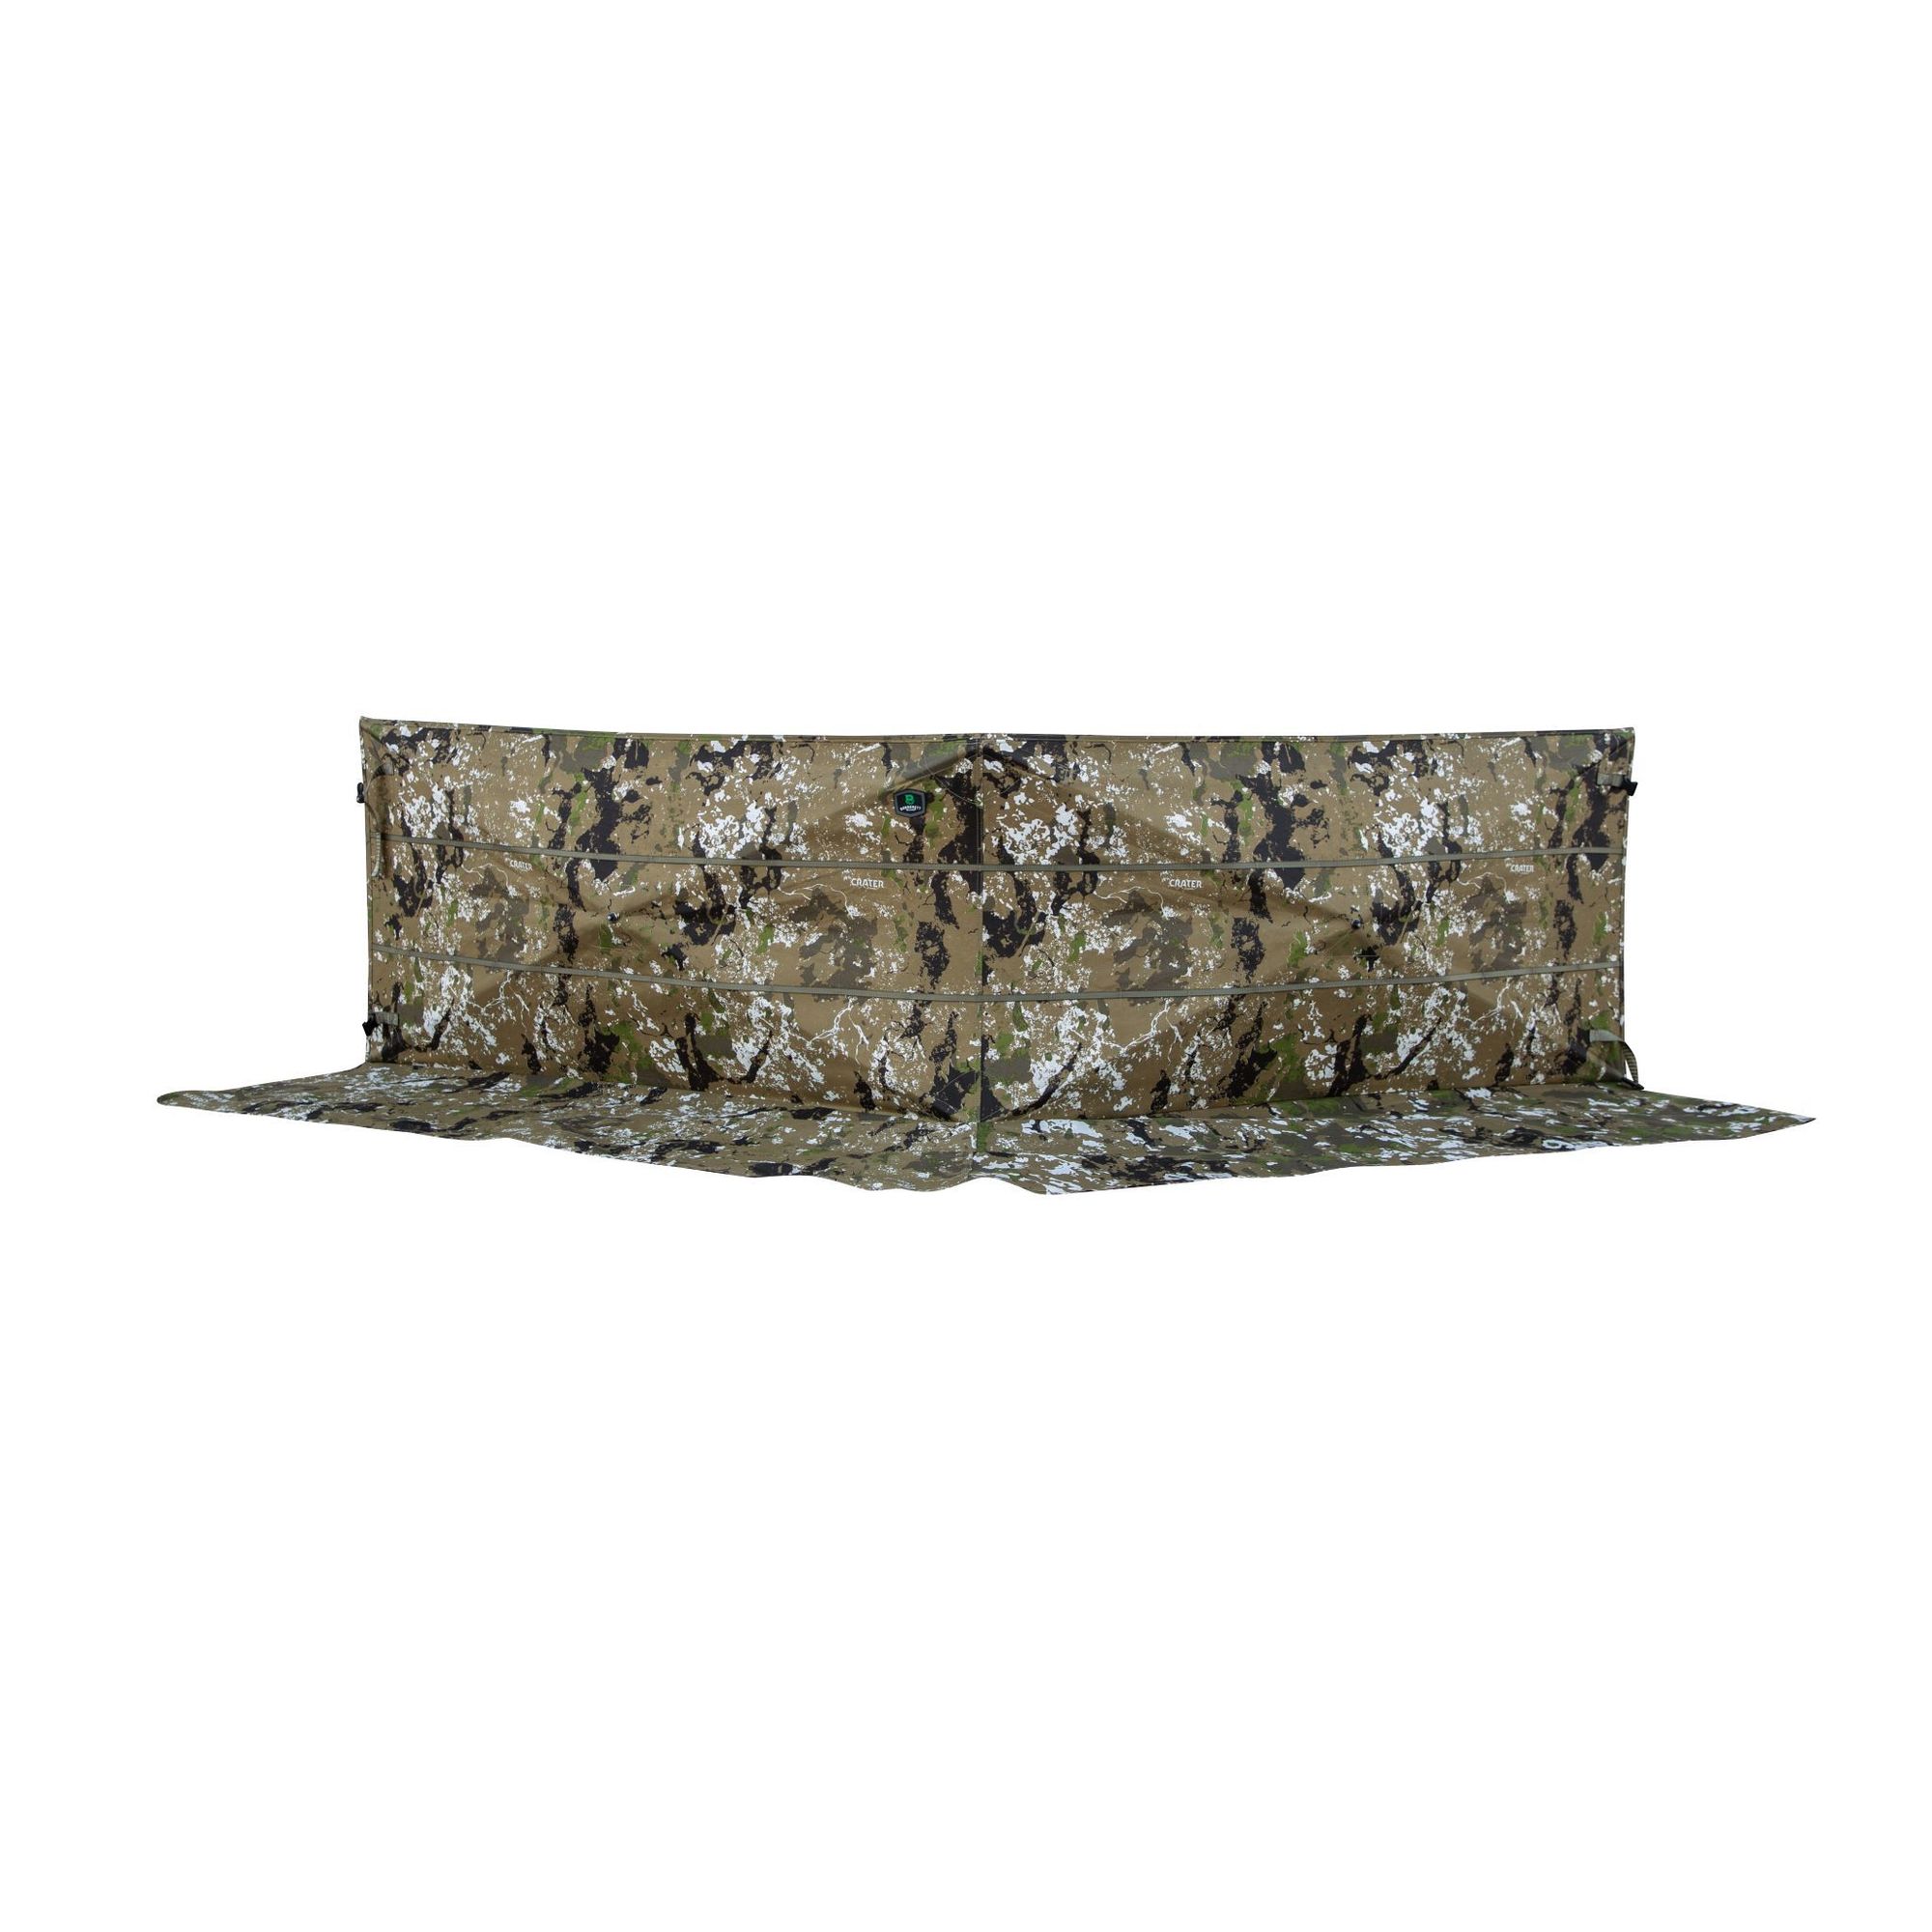 Barronett Blinds, Field Shield Adjustable Panel Blind, 1-2 Person, Color Camouflage, Material Polyester, Model FS100CT